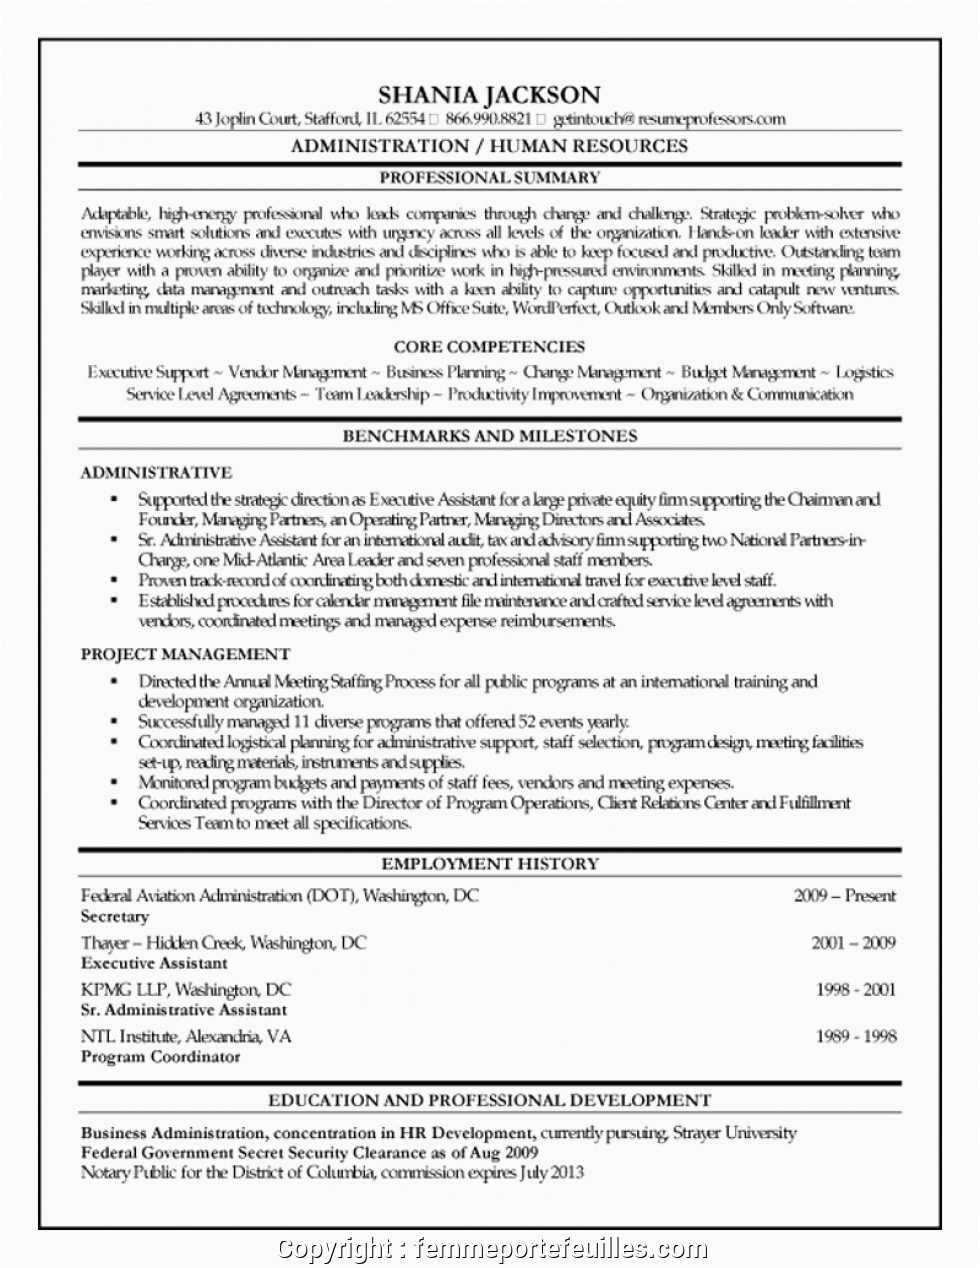 Human Resources Resume Templates Entry Level Simply Entry Level Human Resources Resume Entry Leve Entry